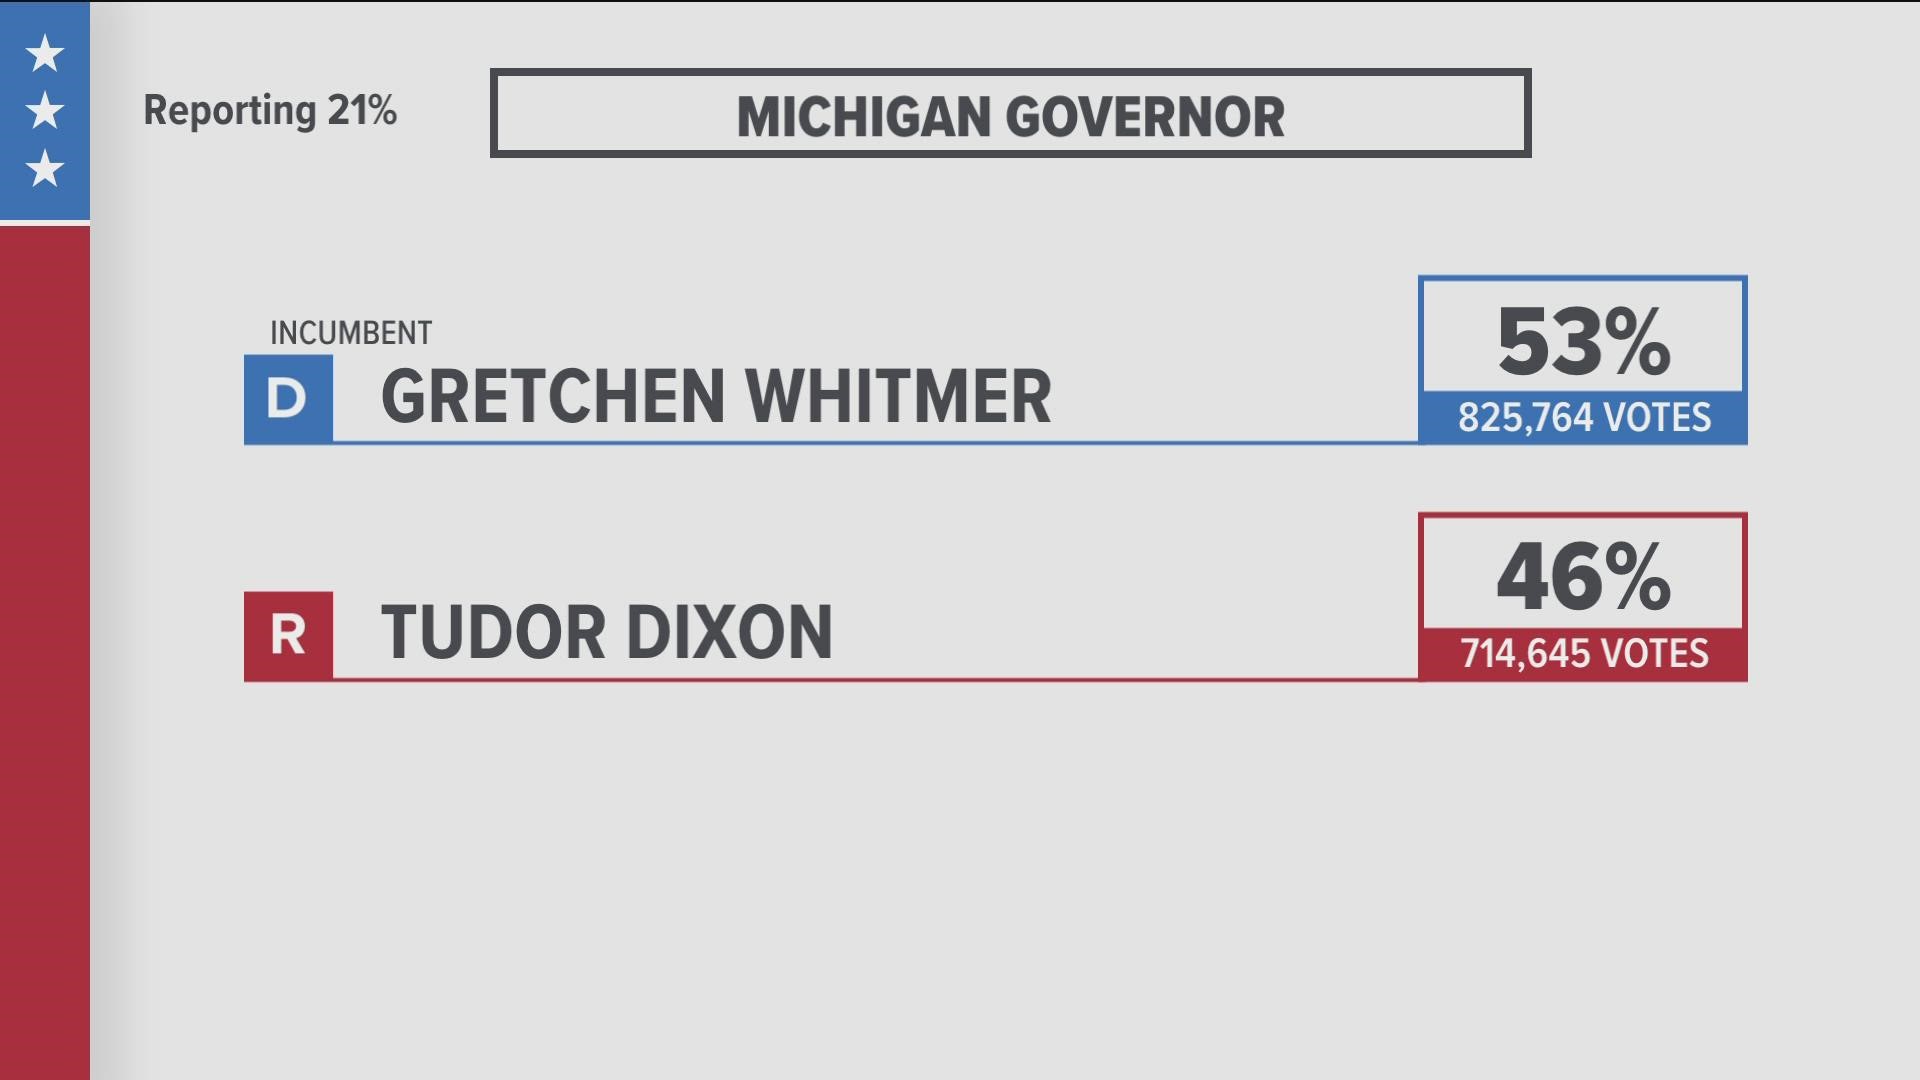 Incumbent Democrat Gretchen Whitmer is seeking re-election. She is challenged by Republican Tudor Dixon.